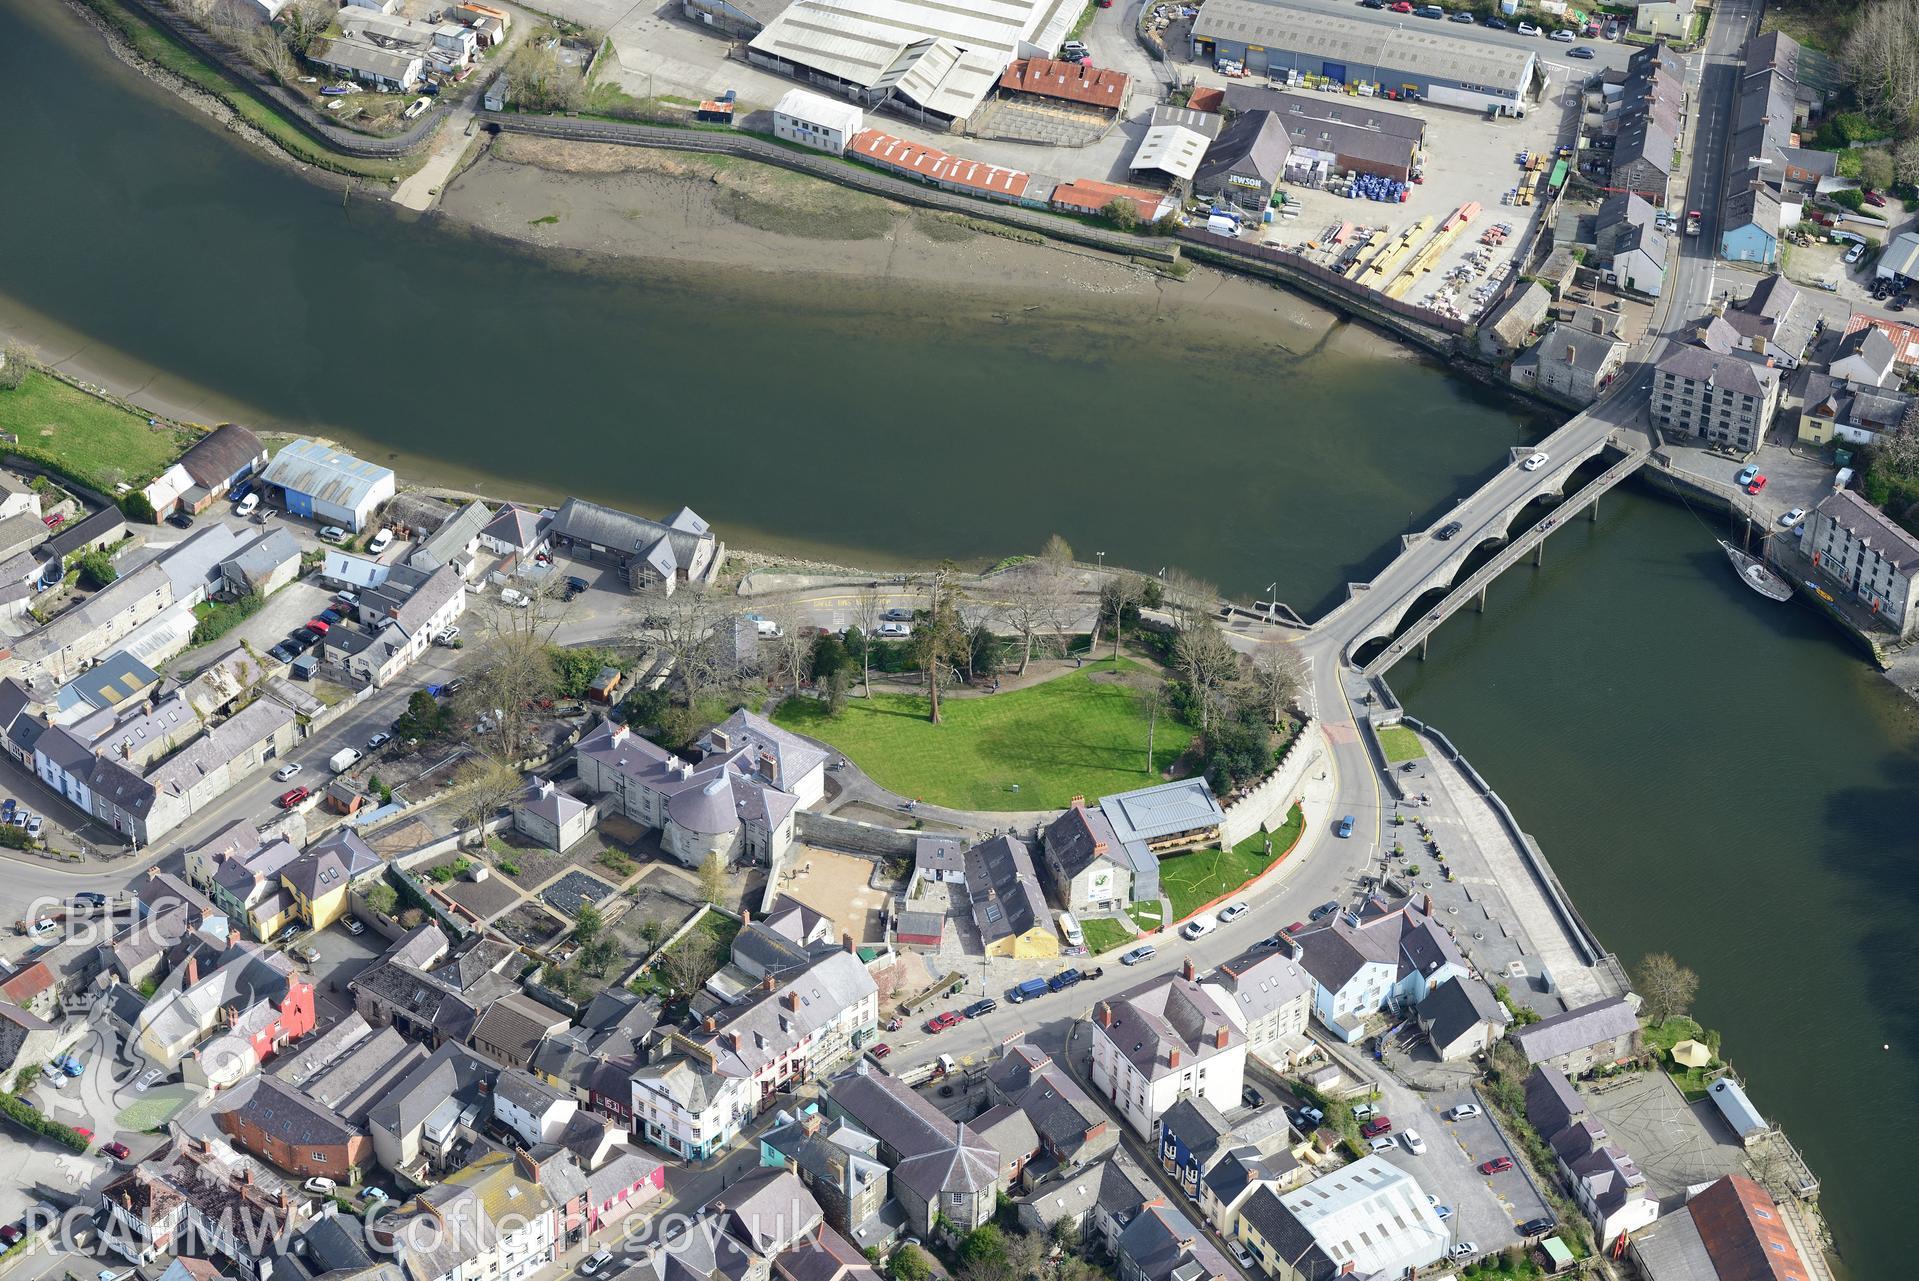 Cardigan Town, Castle, Castle House, Castle Gardener's Cottage, Castle Cottages, Cardigan Bridge, Harbour, Warehouse, Mercantile Wharf and Old Shire Hall. Oblique aerial photograph taken during the Royal Commission's programme of archaeological aerial reconnaissance by Toby Driver 15th April 2015.